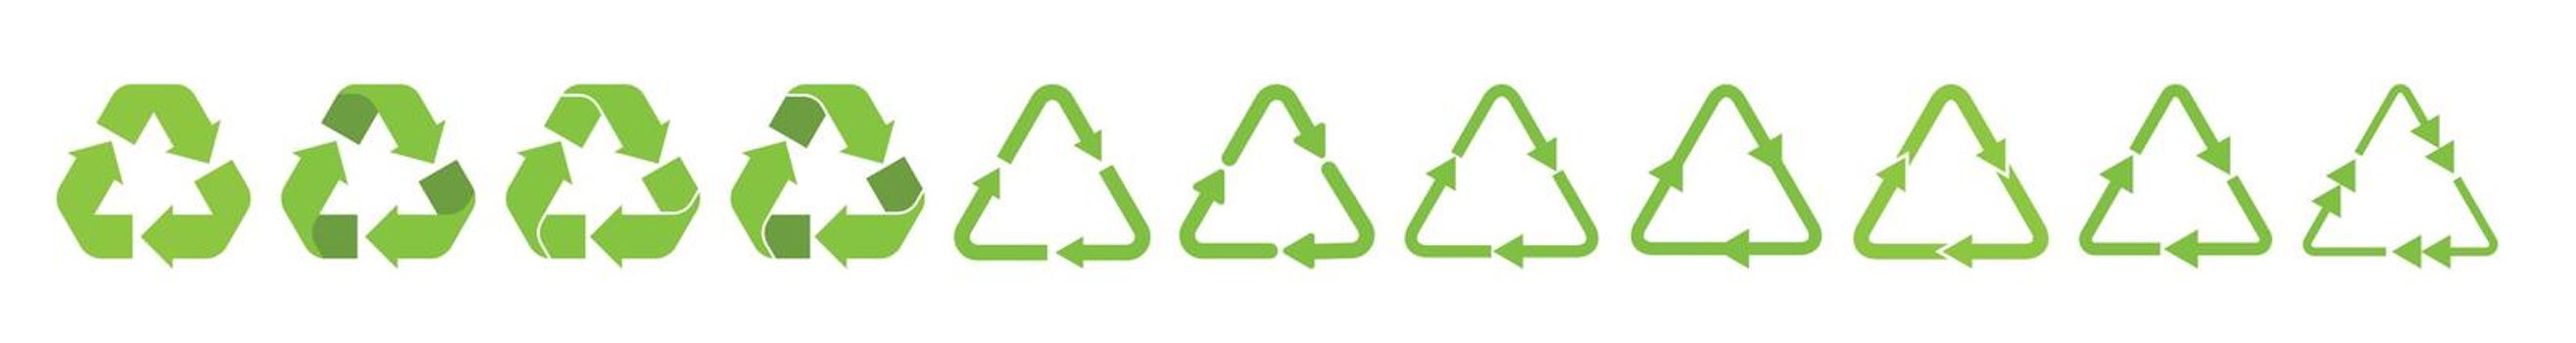 Solid green recycle triangle arrow symbols set